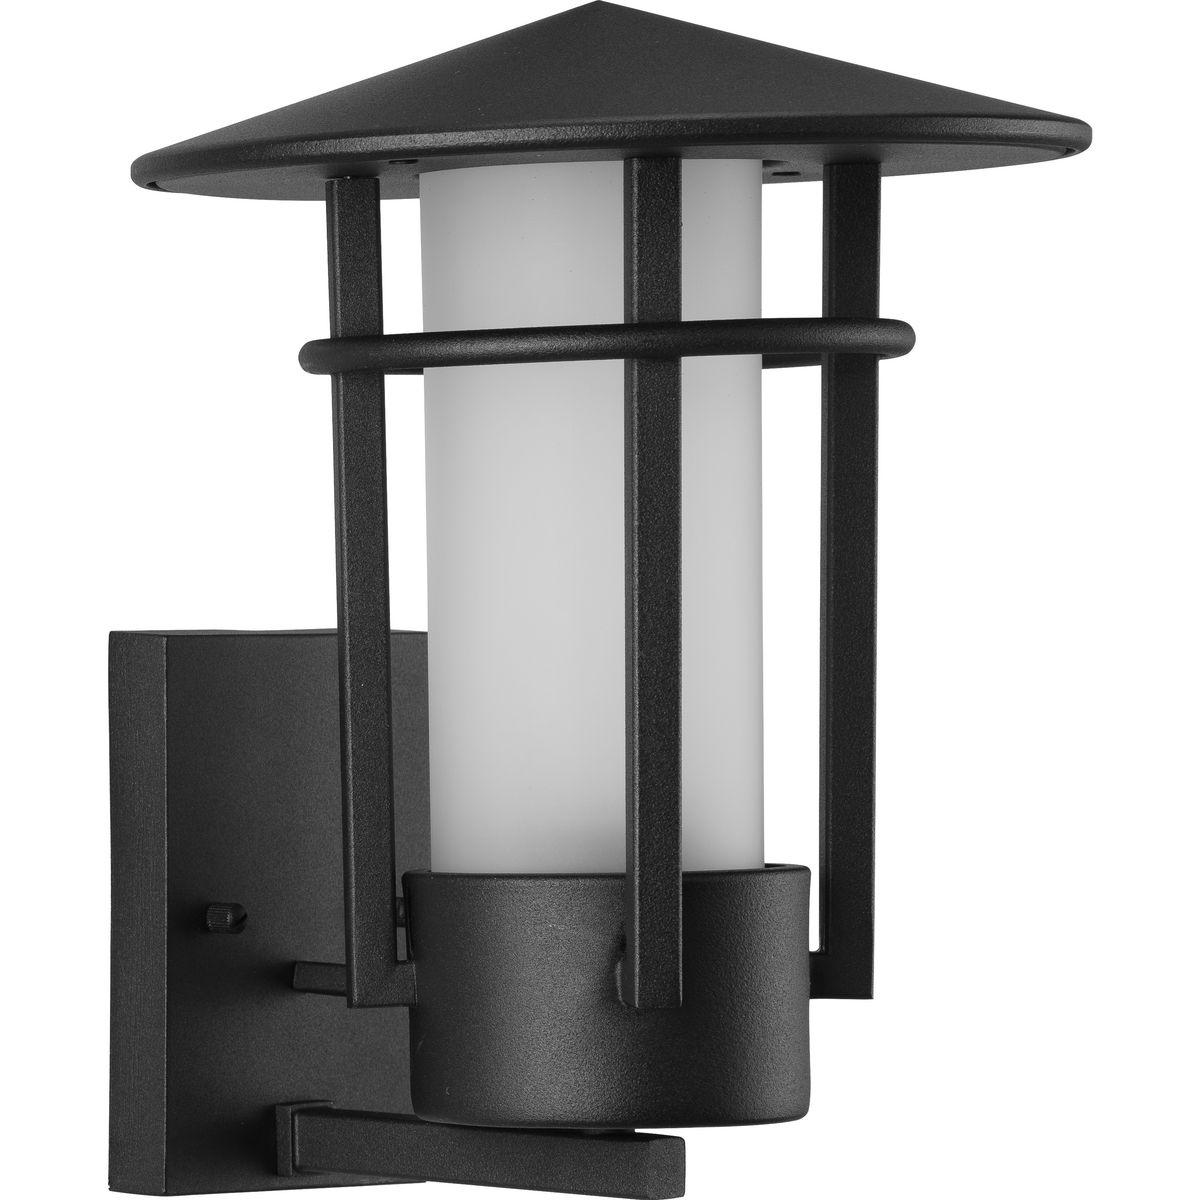 Hubbell P560273-031 Architectural influences blend harmoniously in the Exton Collection 1-Light Textured Black Etched Glass Modern Outdoor Medium Wall Lantern Light. The clean lines and geometric forms interact in the textured black frame culminating in an iconic peaked roof